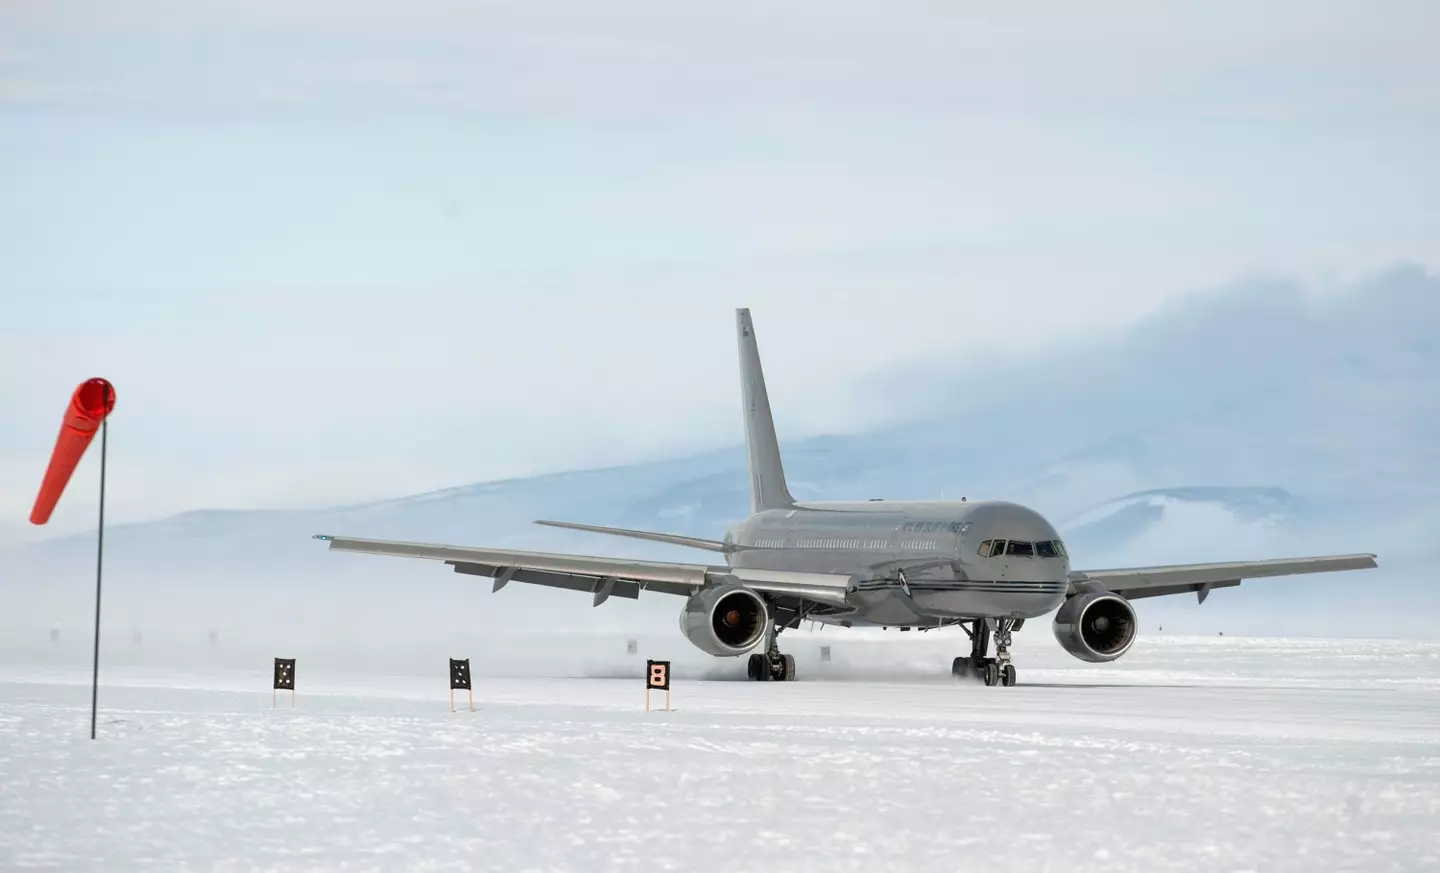 The plane carrying family members of the Erebus victims touched down in Antarctica for a memorial service in 2011 in Antarctica (Ross Land/NZPA-Pool/Getty Images)